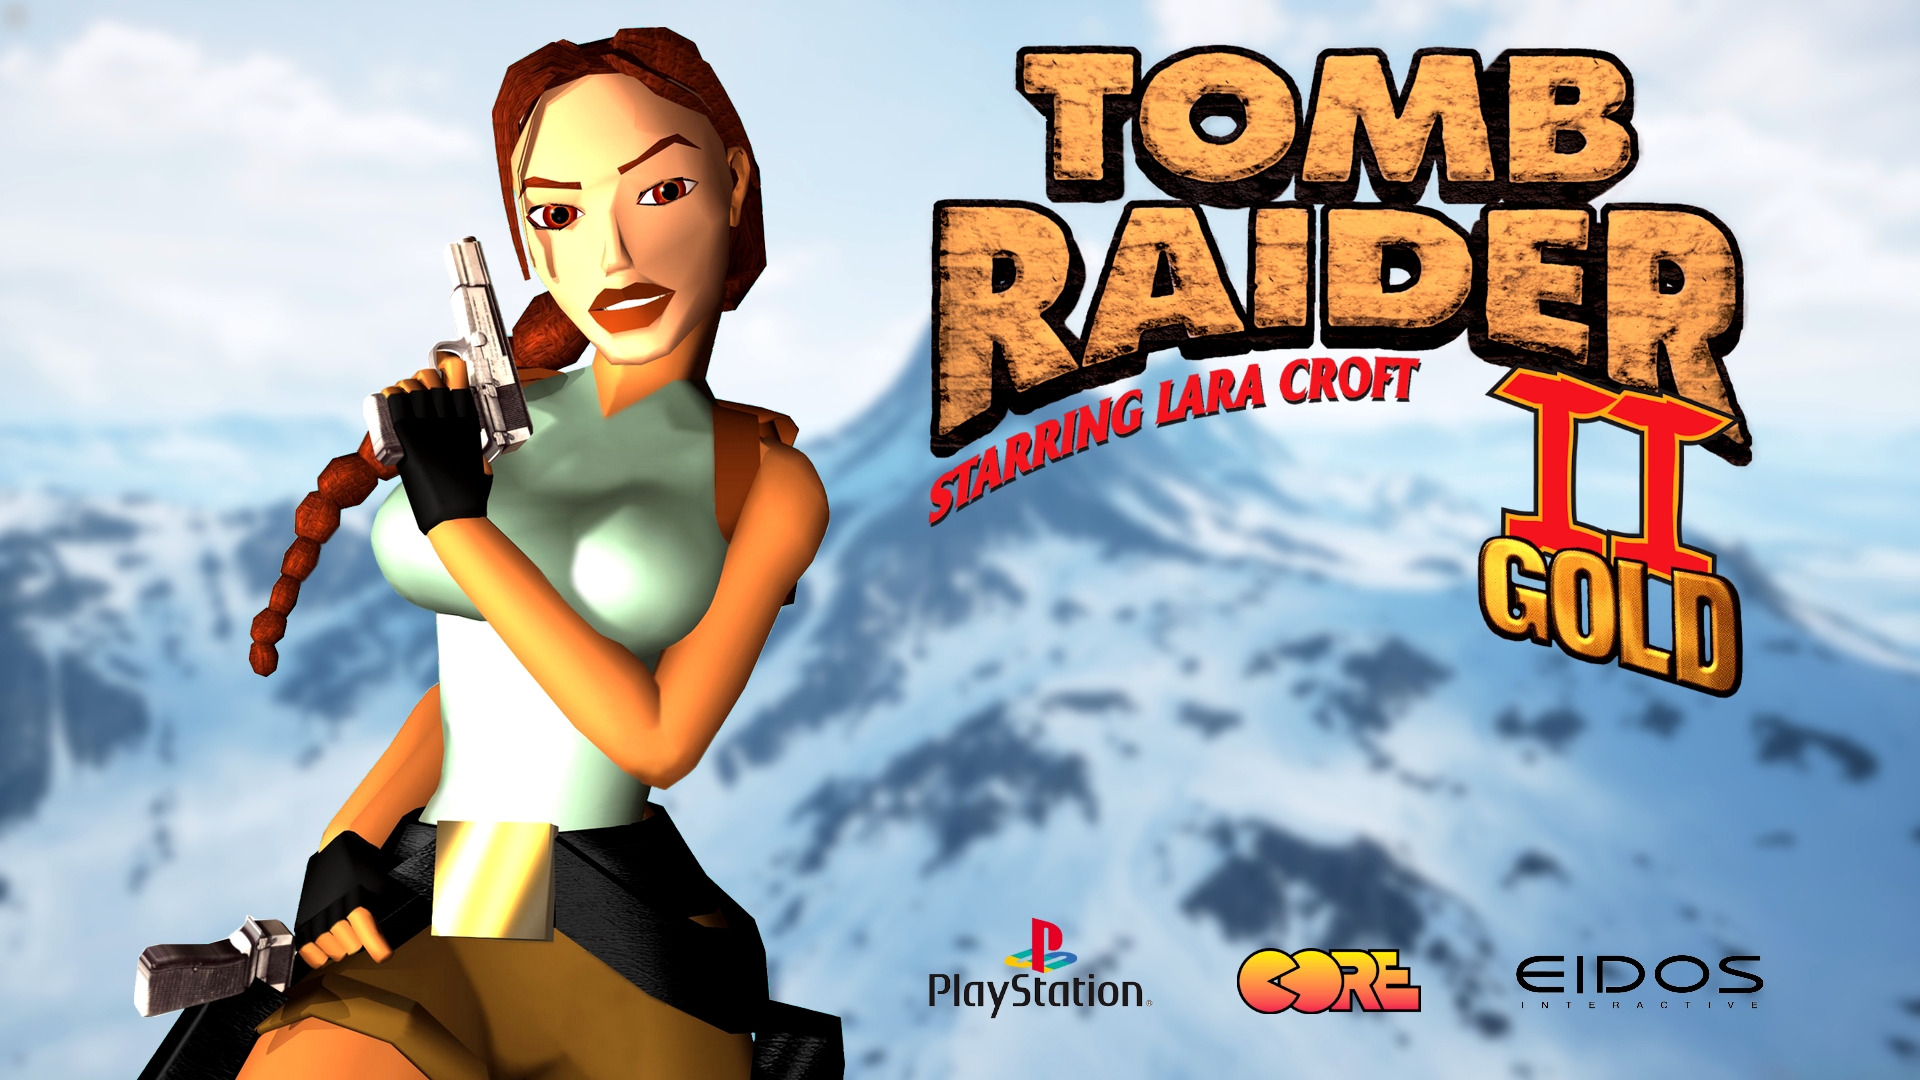 Tomb Raider 2 PC Download Free Full Game For windows